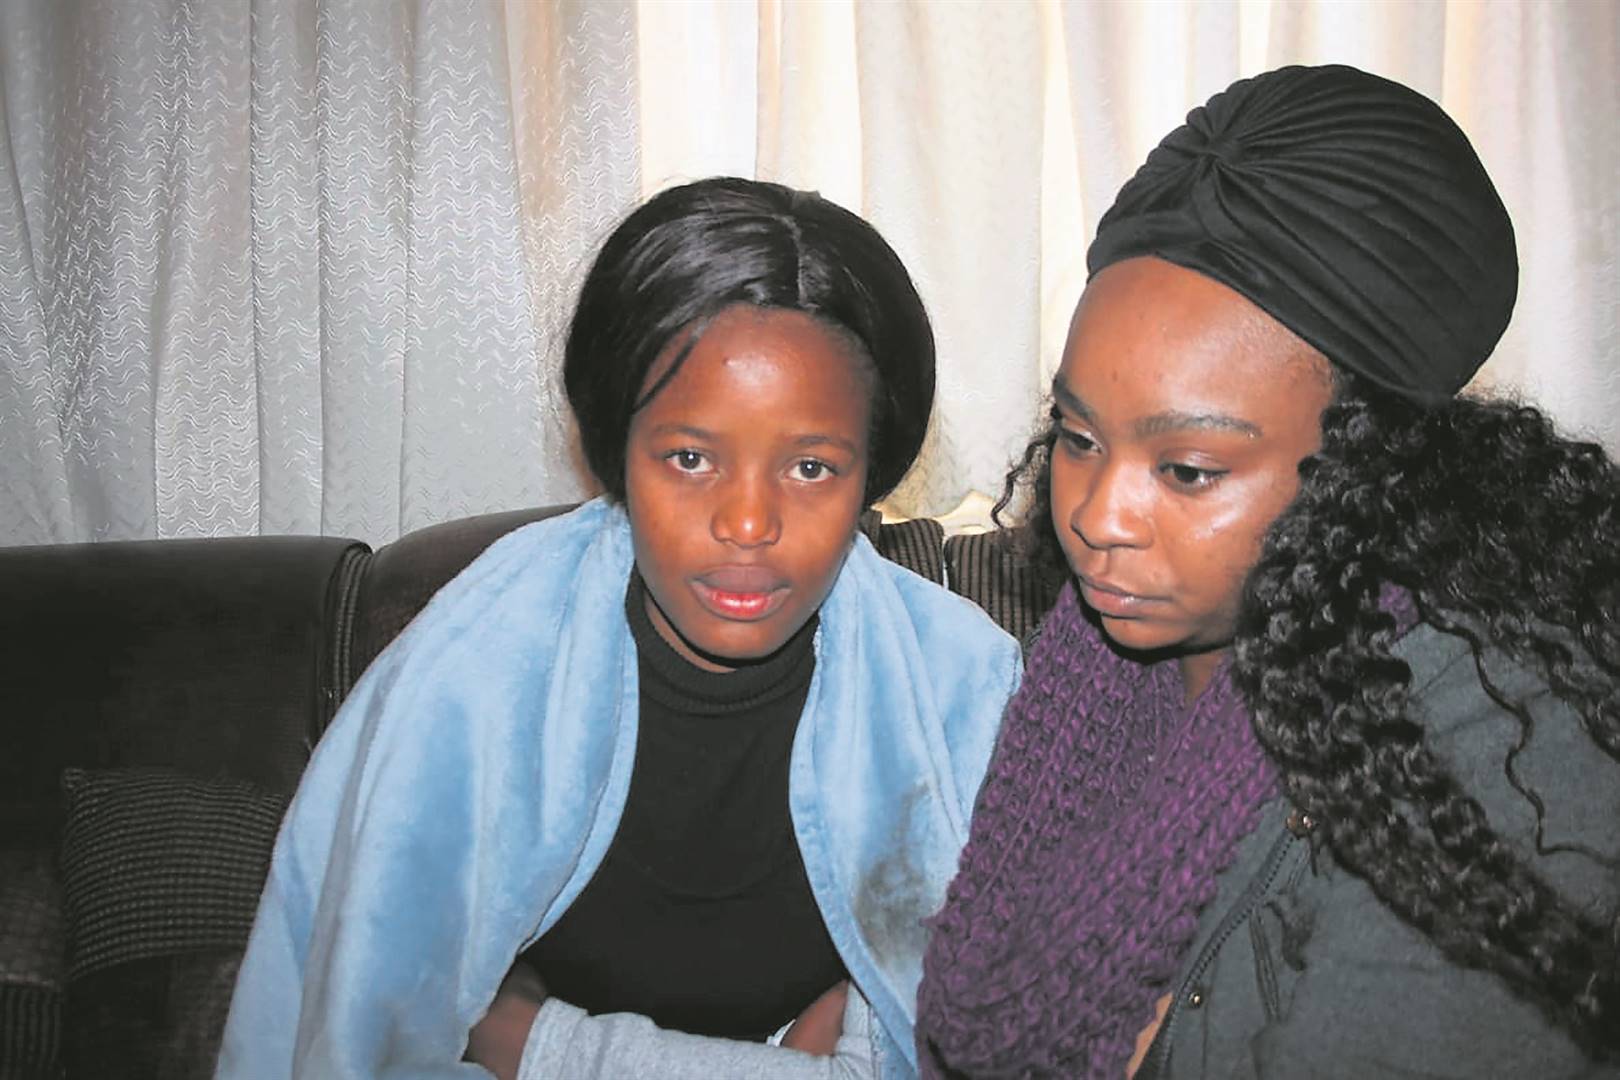 GRIEVING: Atlegang’s girlfriend Nqobile Mdlalose and his older sister, Lethabo Mohlala, mourn his death. Atlegang Selepe (inset) was shot dead.          Photo by                      Phineas Khoza